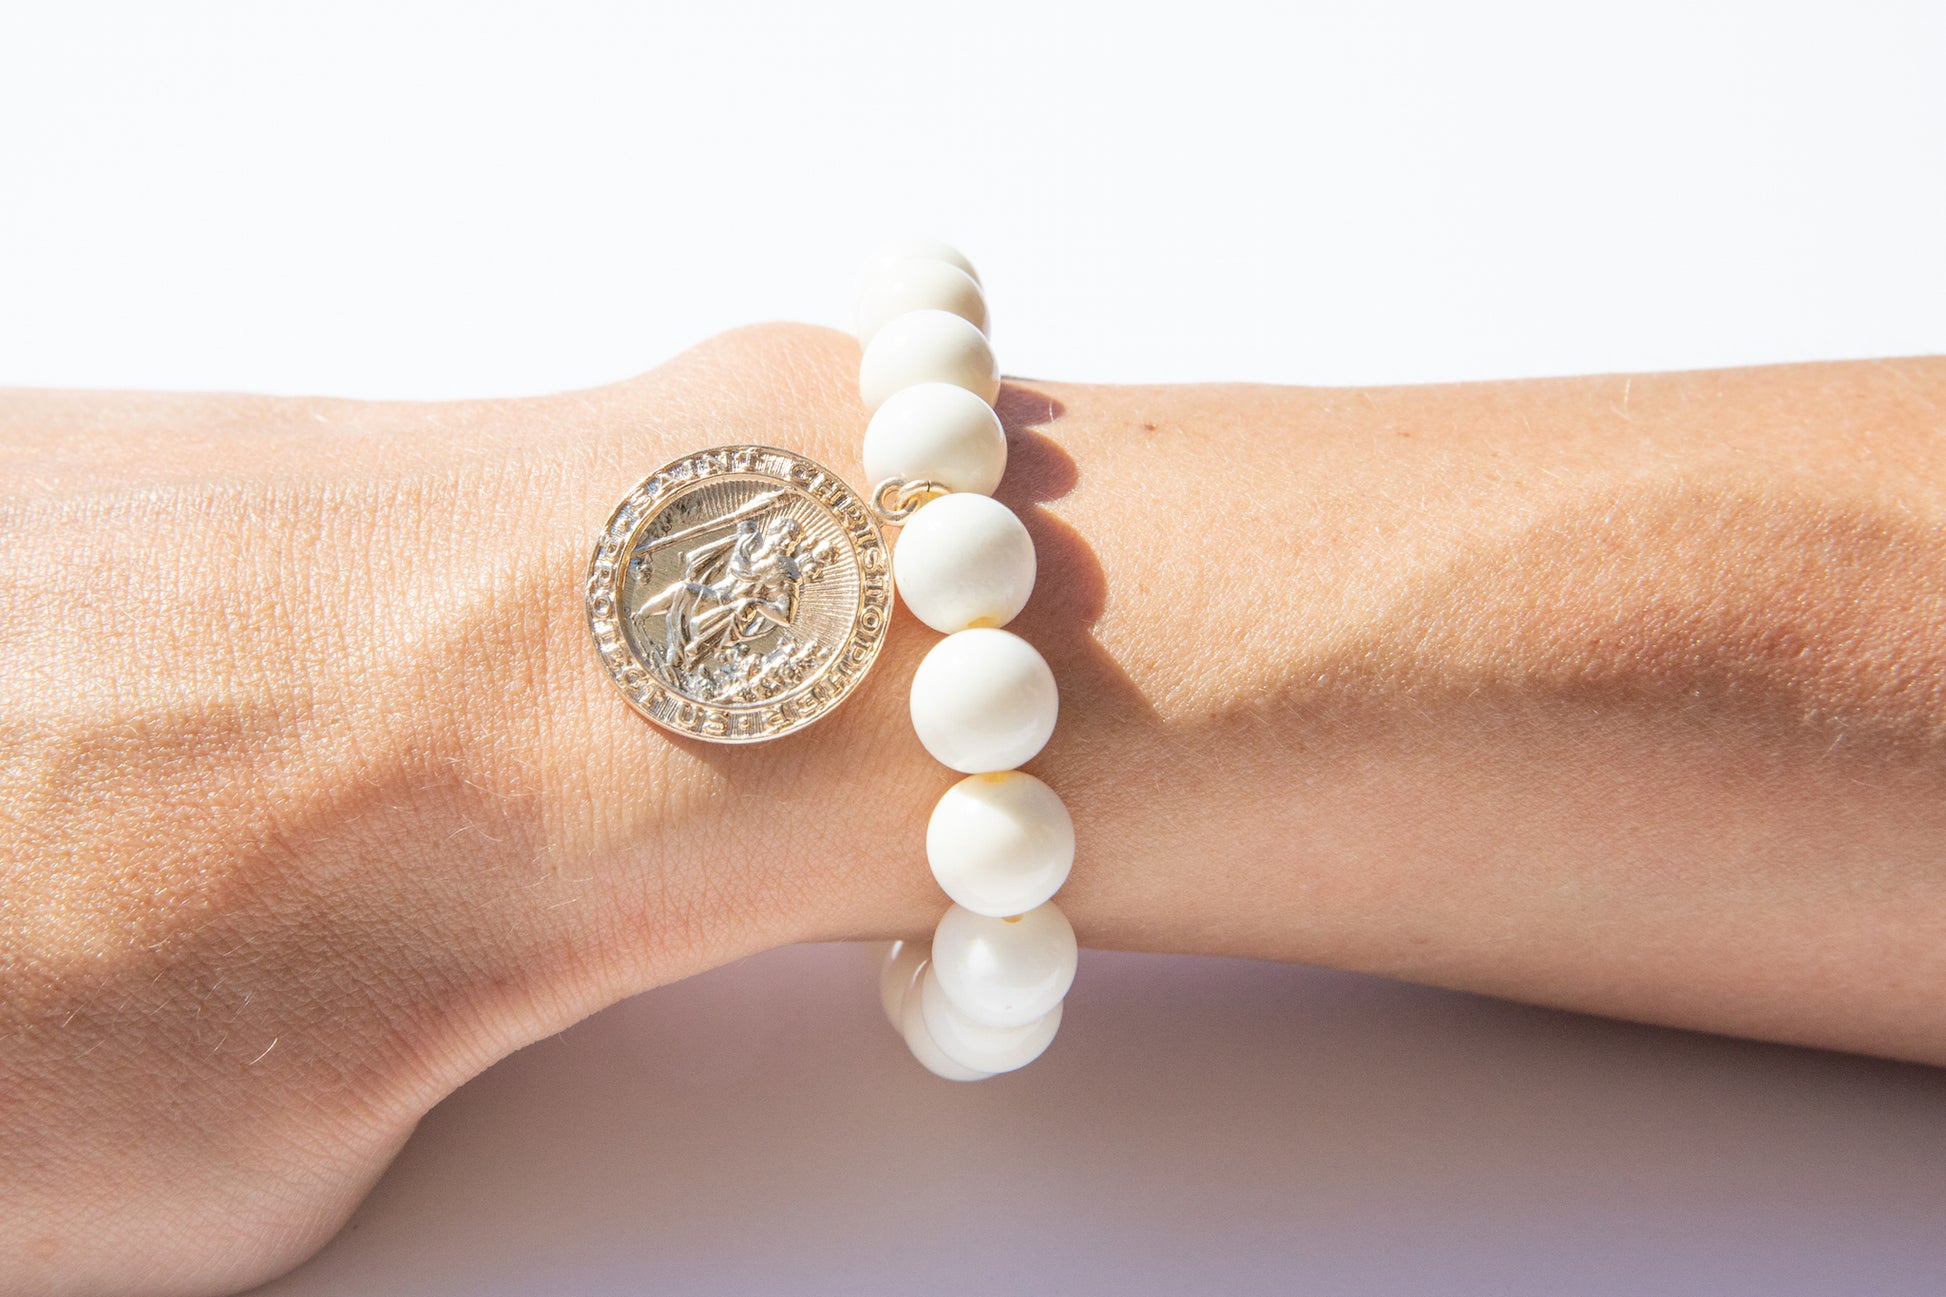 White Bone Bead Bracelet Adorned With a  Yellow Gold Filled St Christopher Medallion Coin Charm Featured on Arm